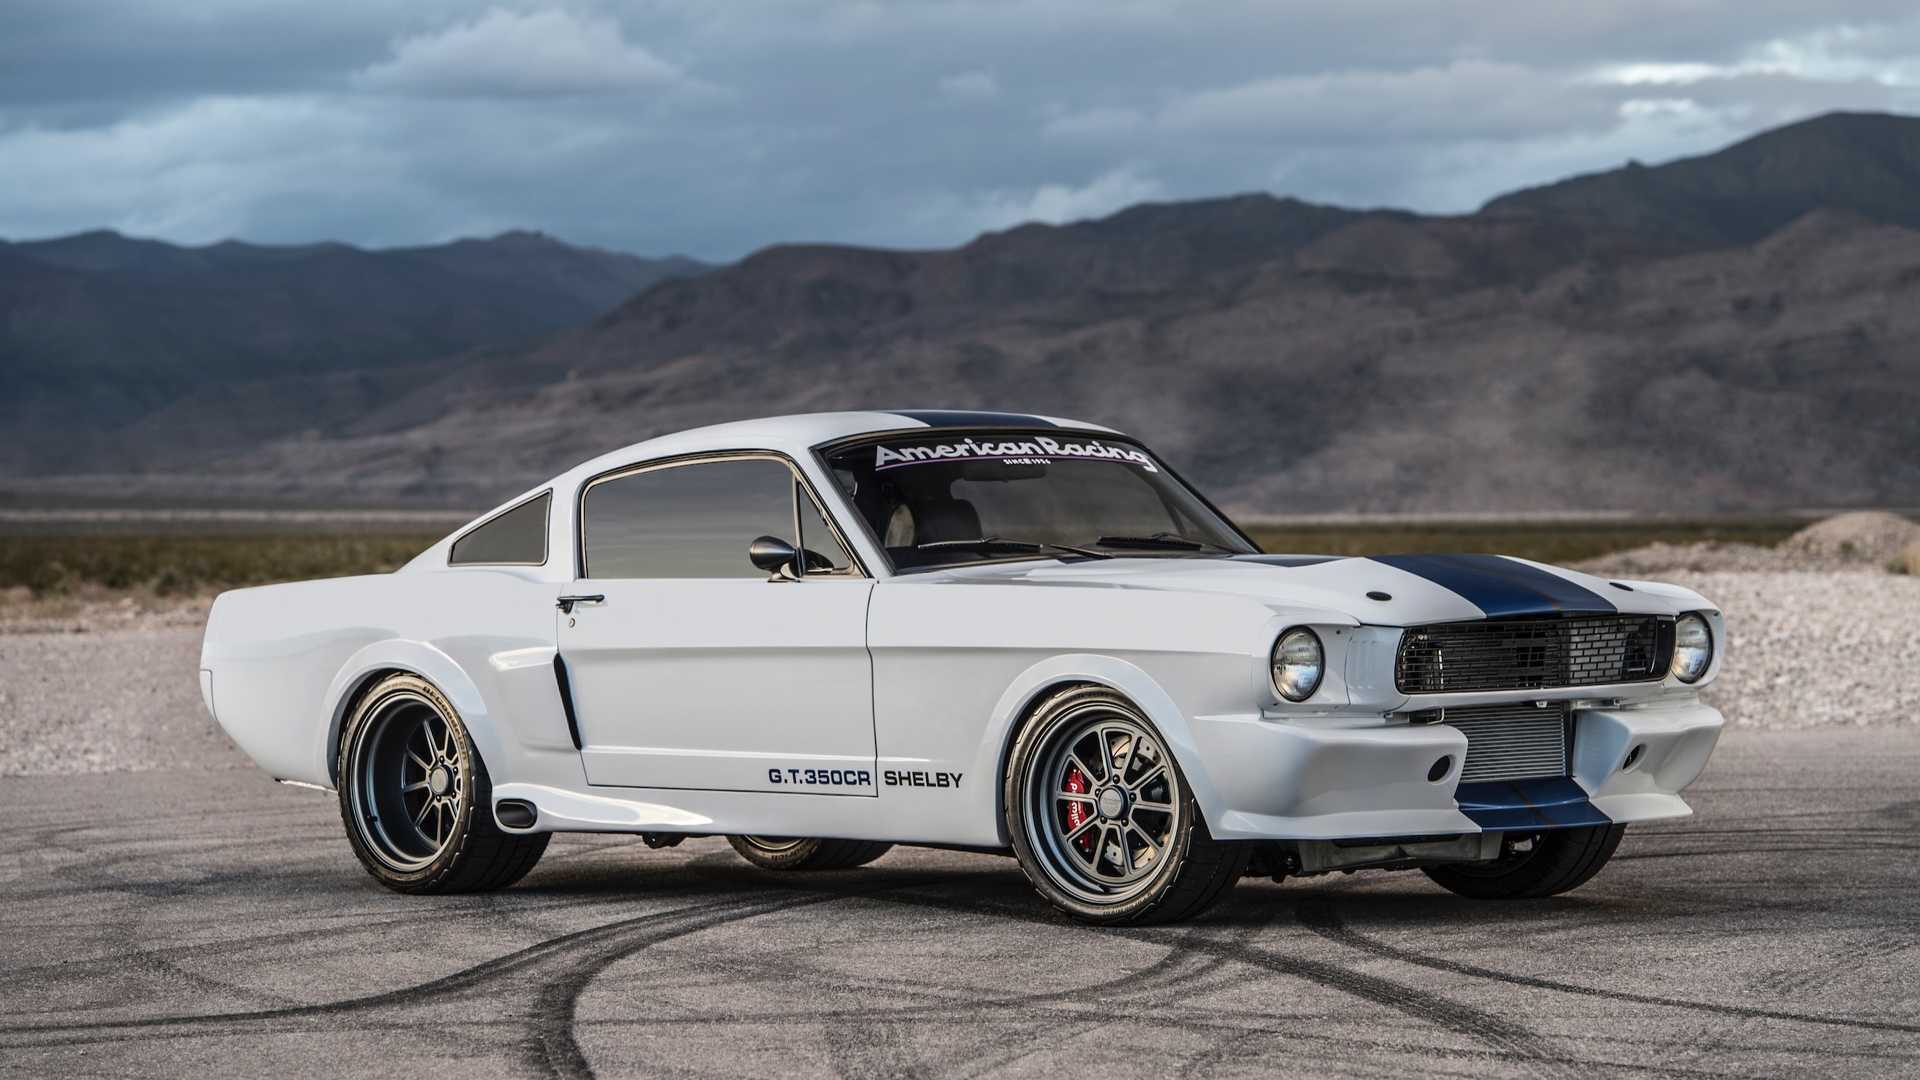 Mustang Of The Day: GT350CR Pro-Touring Shelby Mustang By Classic Recreations